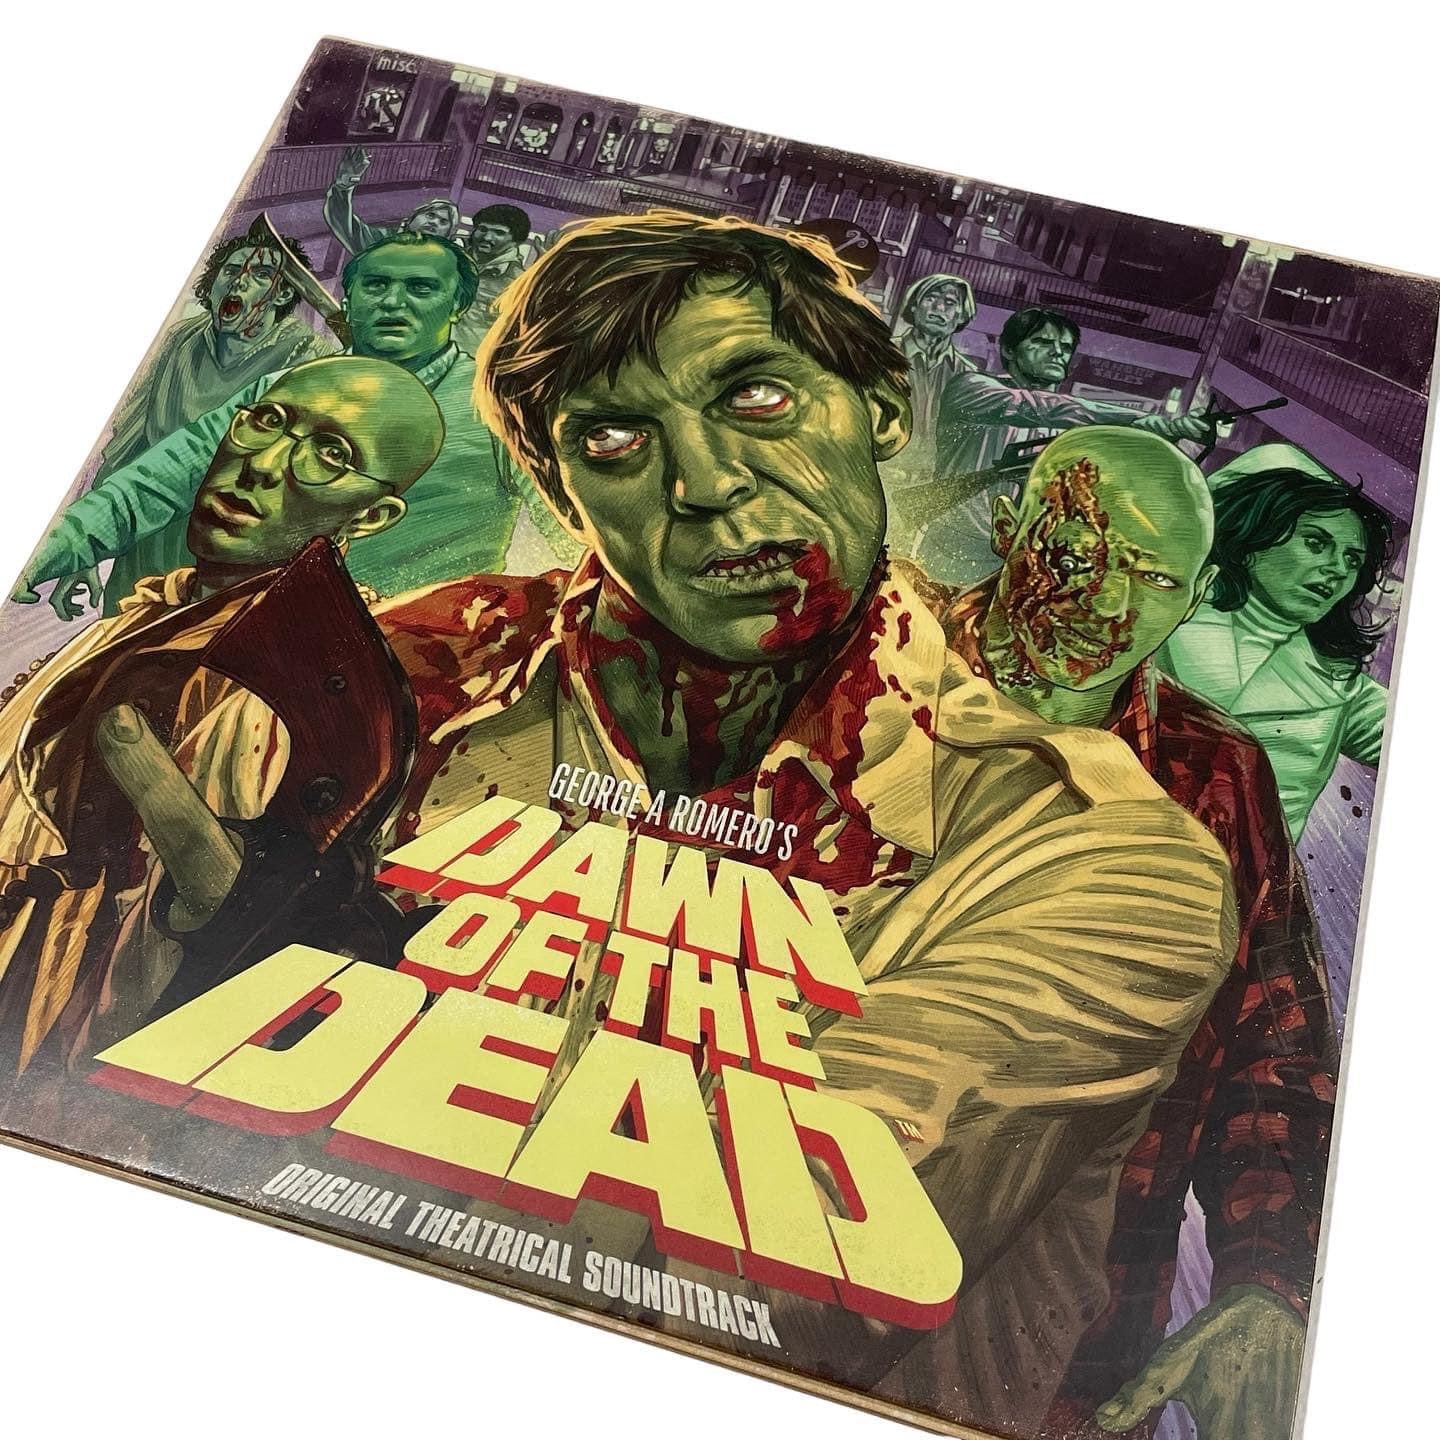 Dawn of the Dead (Original Theatrical Soundtrack) – First City Records